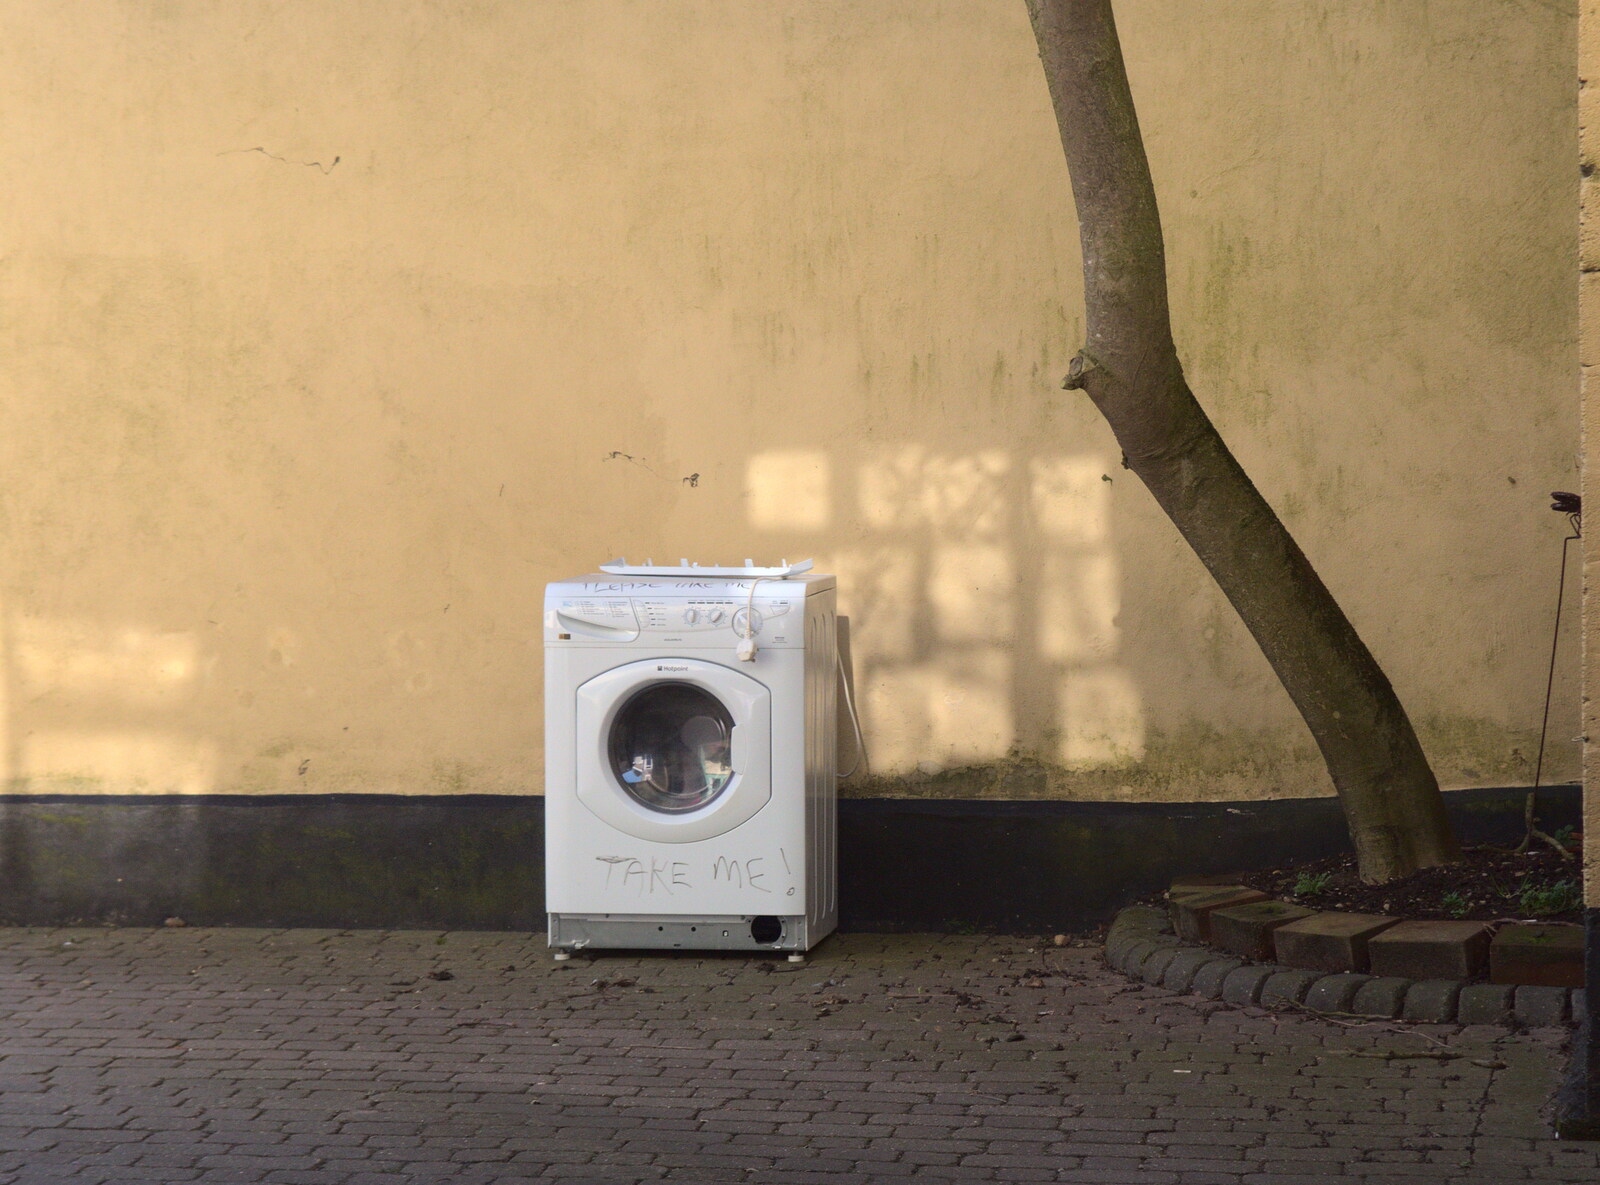 A Walk Around Eye, and the Return of Red Tent, Suffolk and London - 25th February 2018: A discarded washing machine pleads for a new home